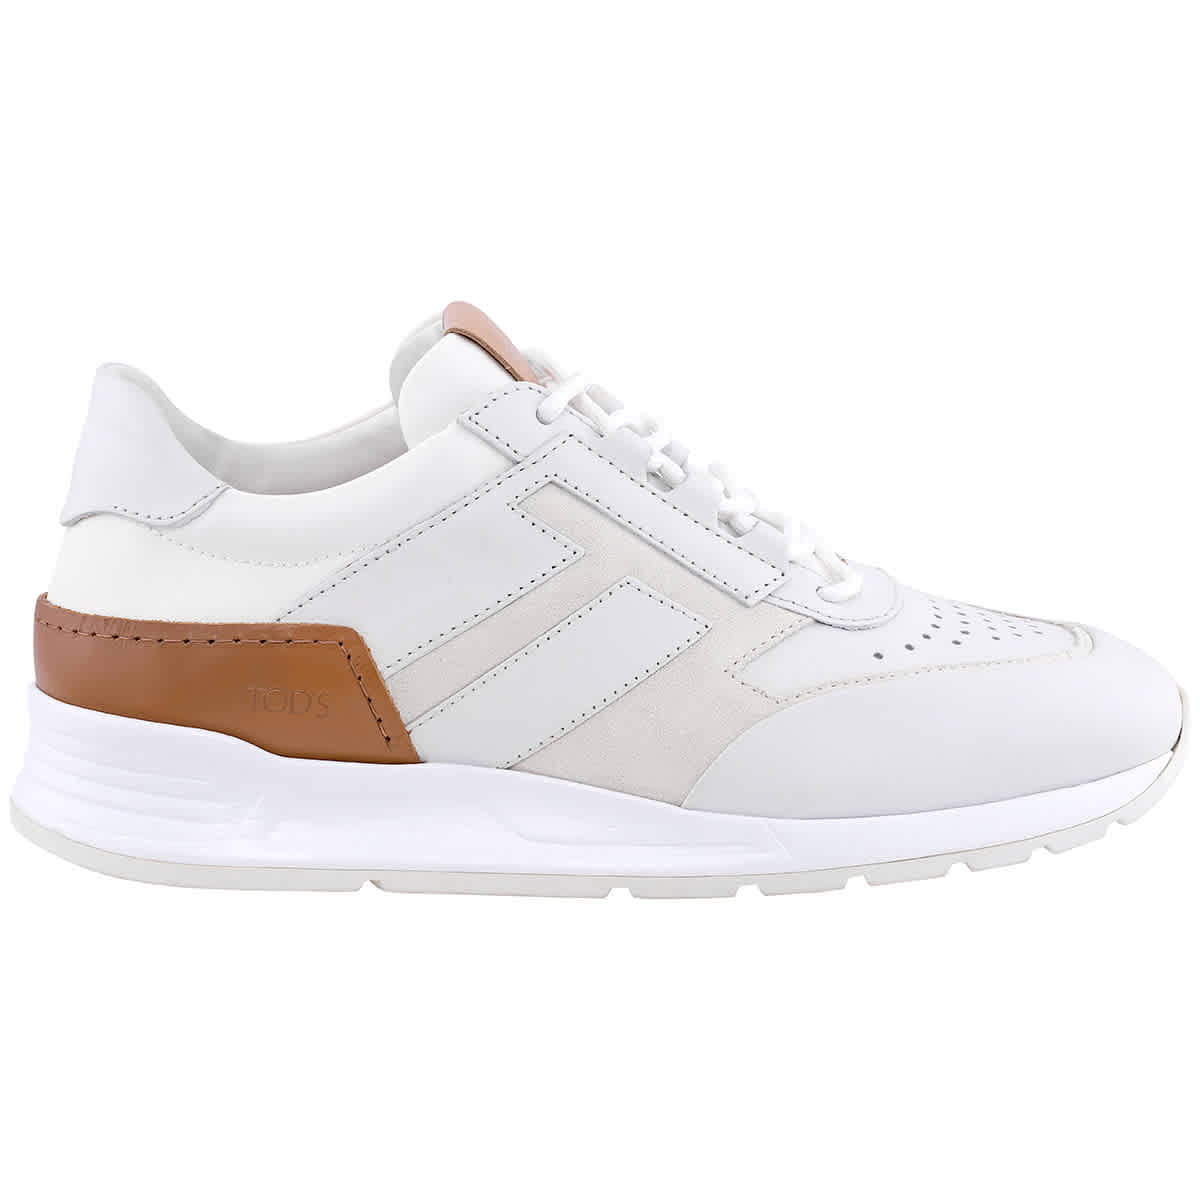 philosophy The room Grasp Tods Men's Low Top Leather Sneakers In White, Brand Size 5.5 ( US Size 6.5  ) - Walmart.com